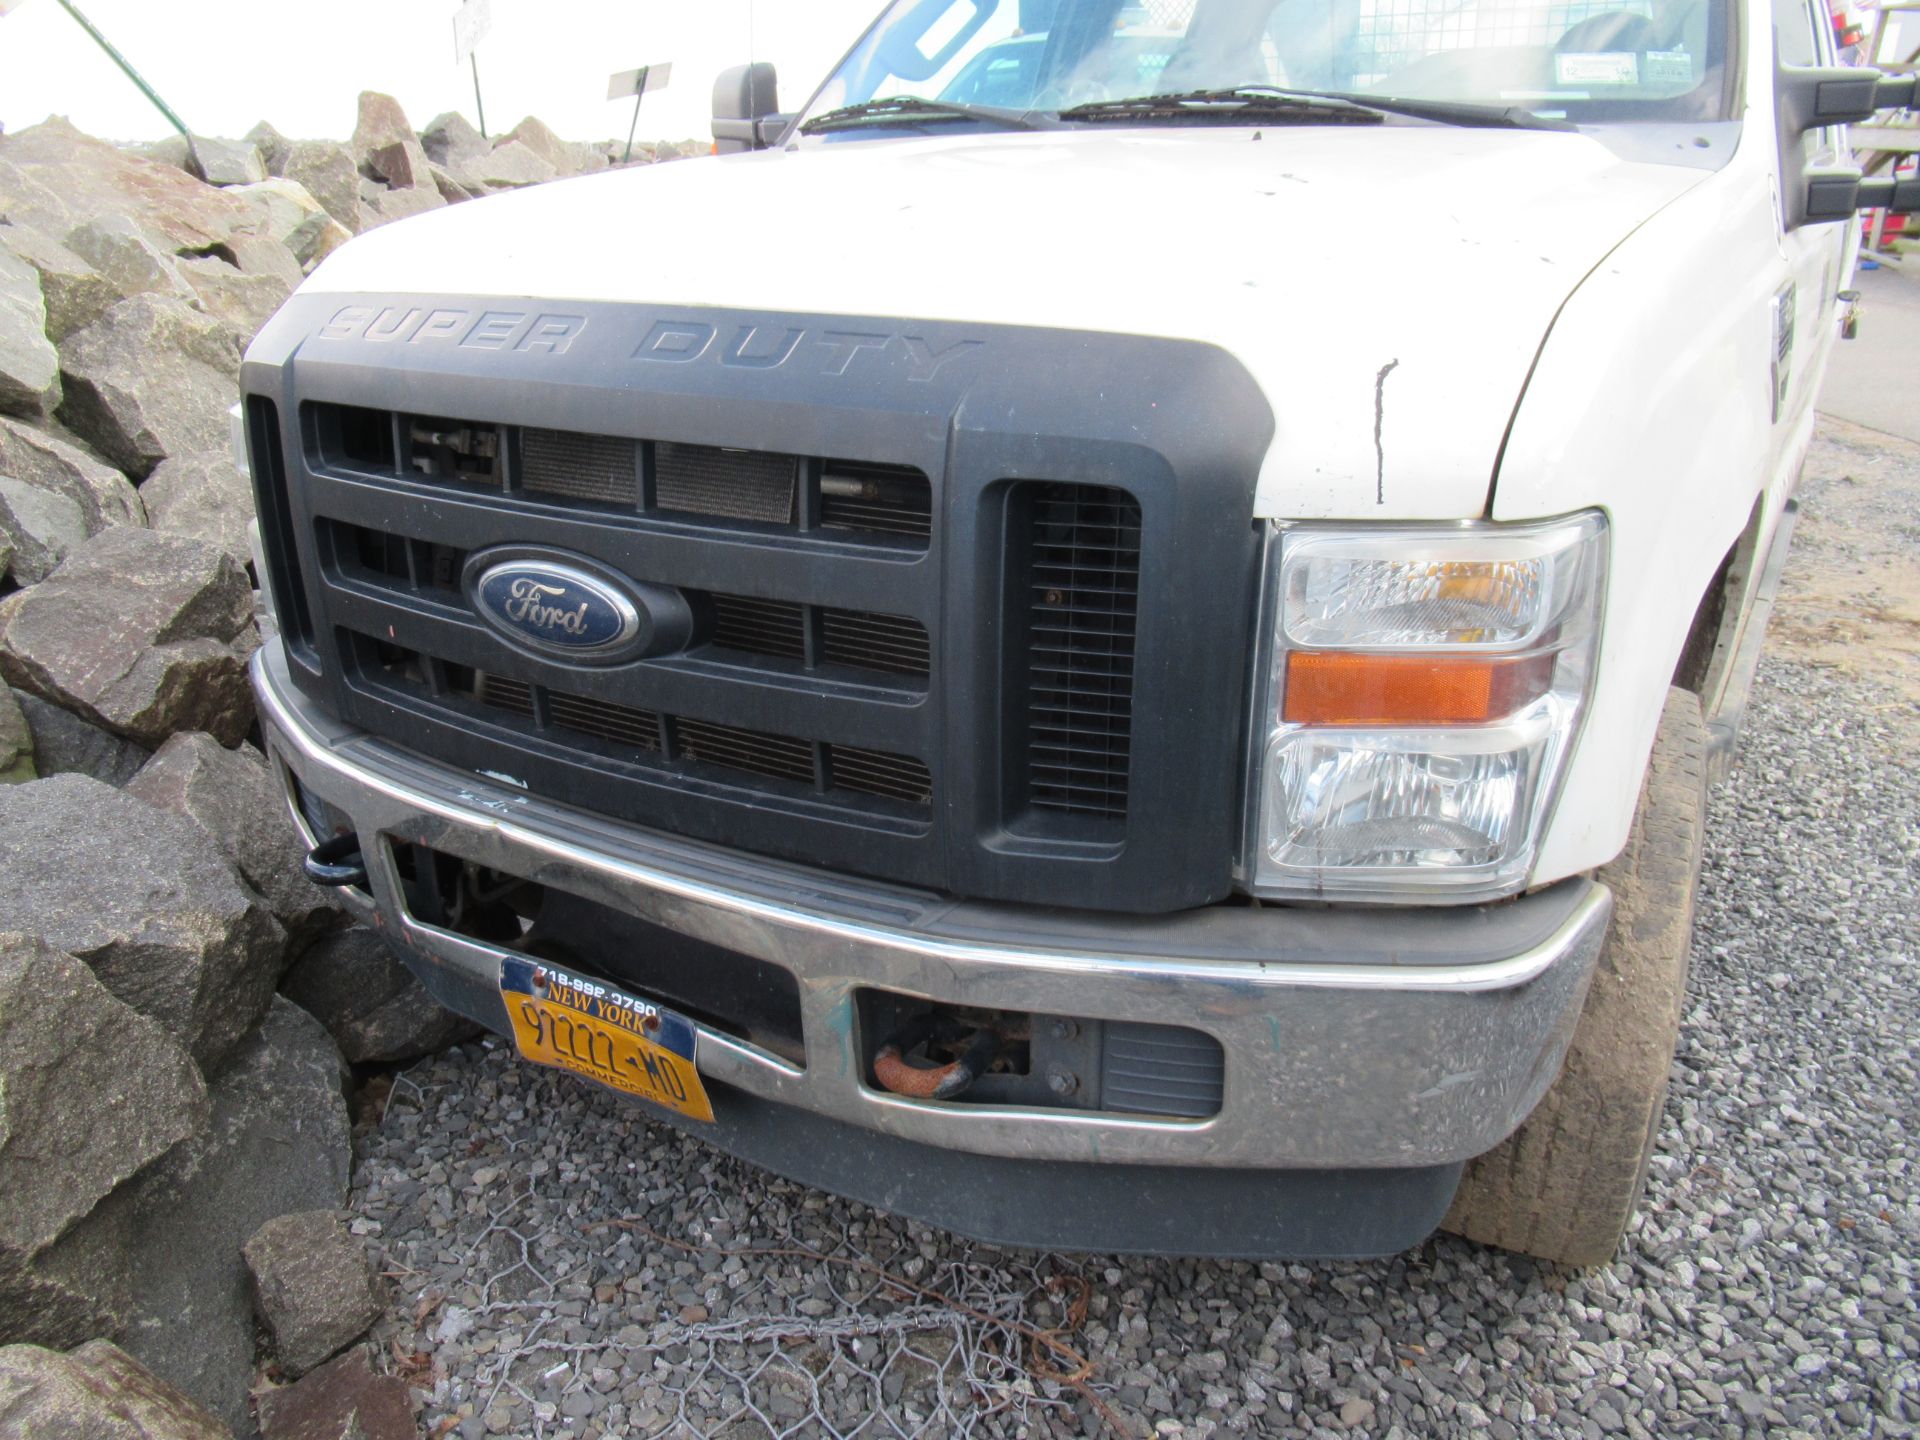 2009 FORD F-250 XL SUPER DUTY UTILITY TRUCK, 4-DOOR, 4-WHEEL DRIVE, CLOTH SEATS, APPROXIMATELY 116, - Image 3 of 18